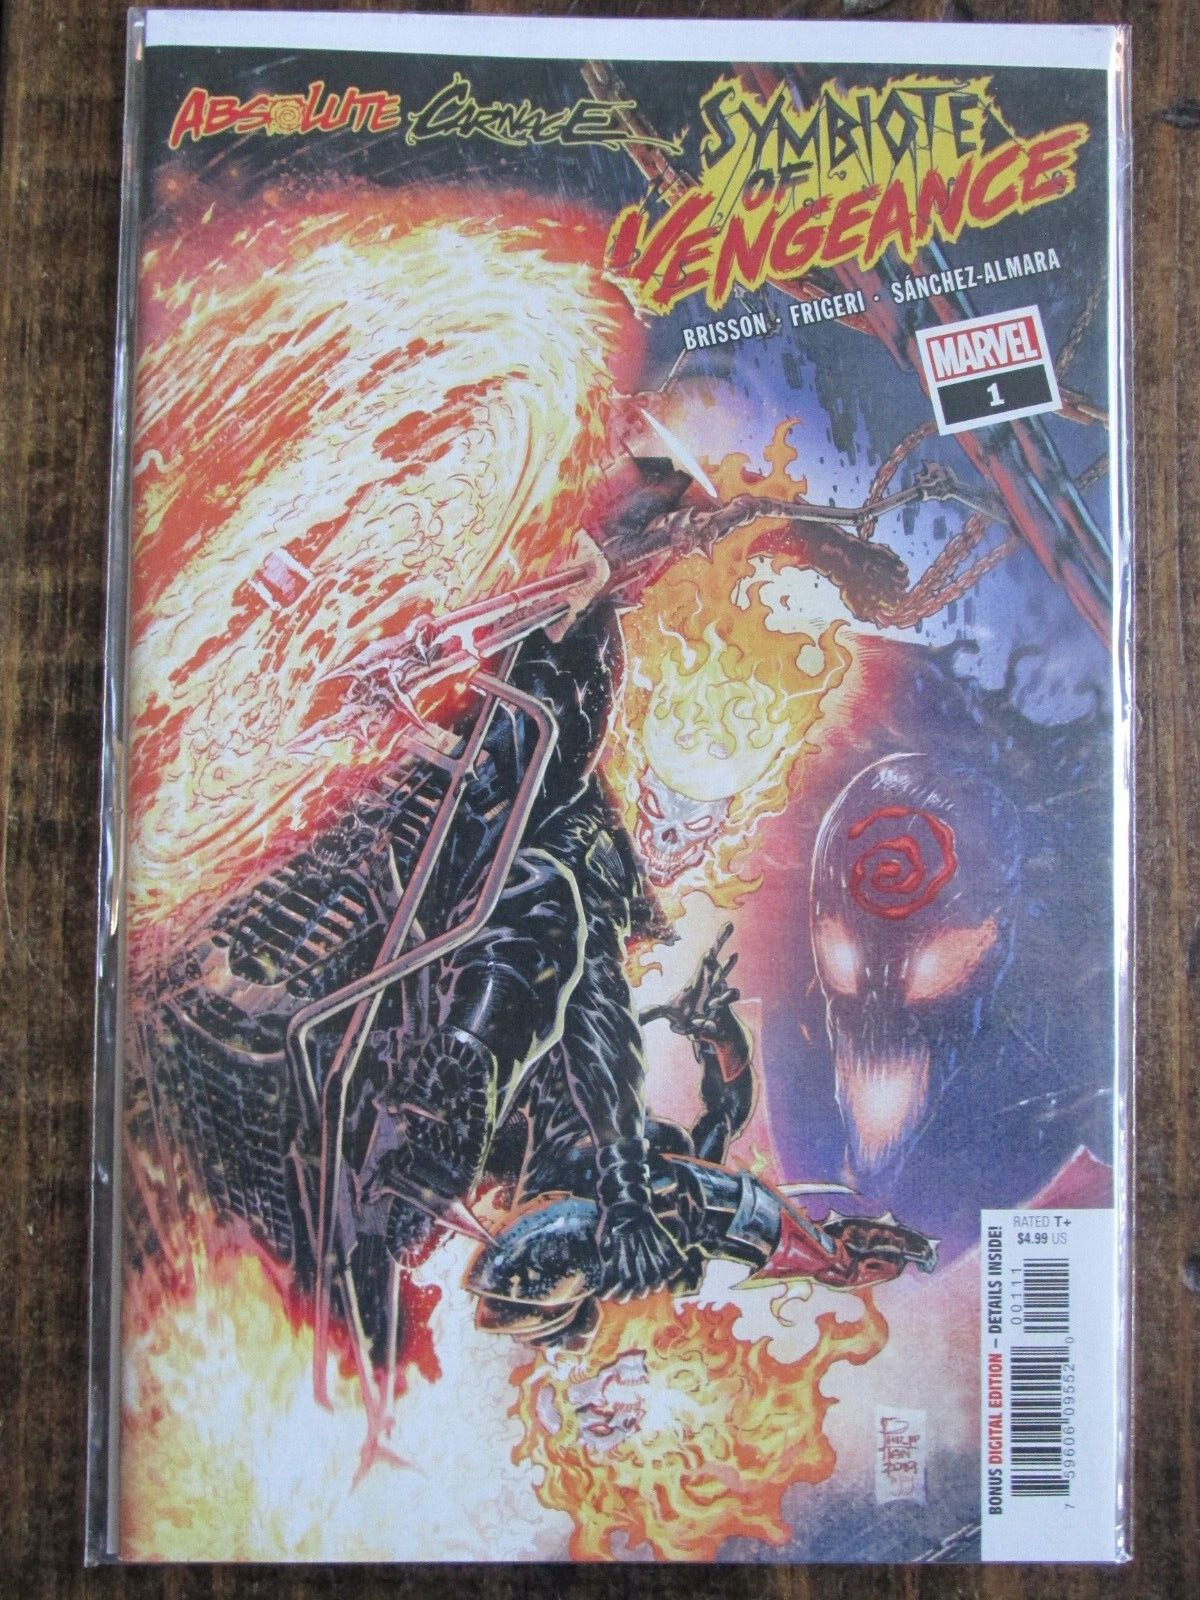 Marvel 2019 ABSOLUTE CARNAGE SYMBIOTE VENGEANCE Comic Book Issue # 1 A Cover 1A